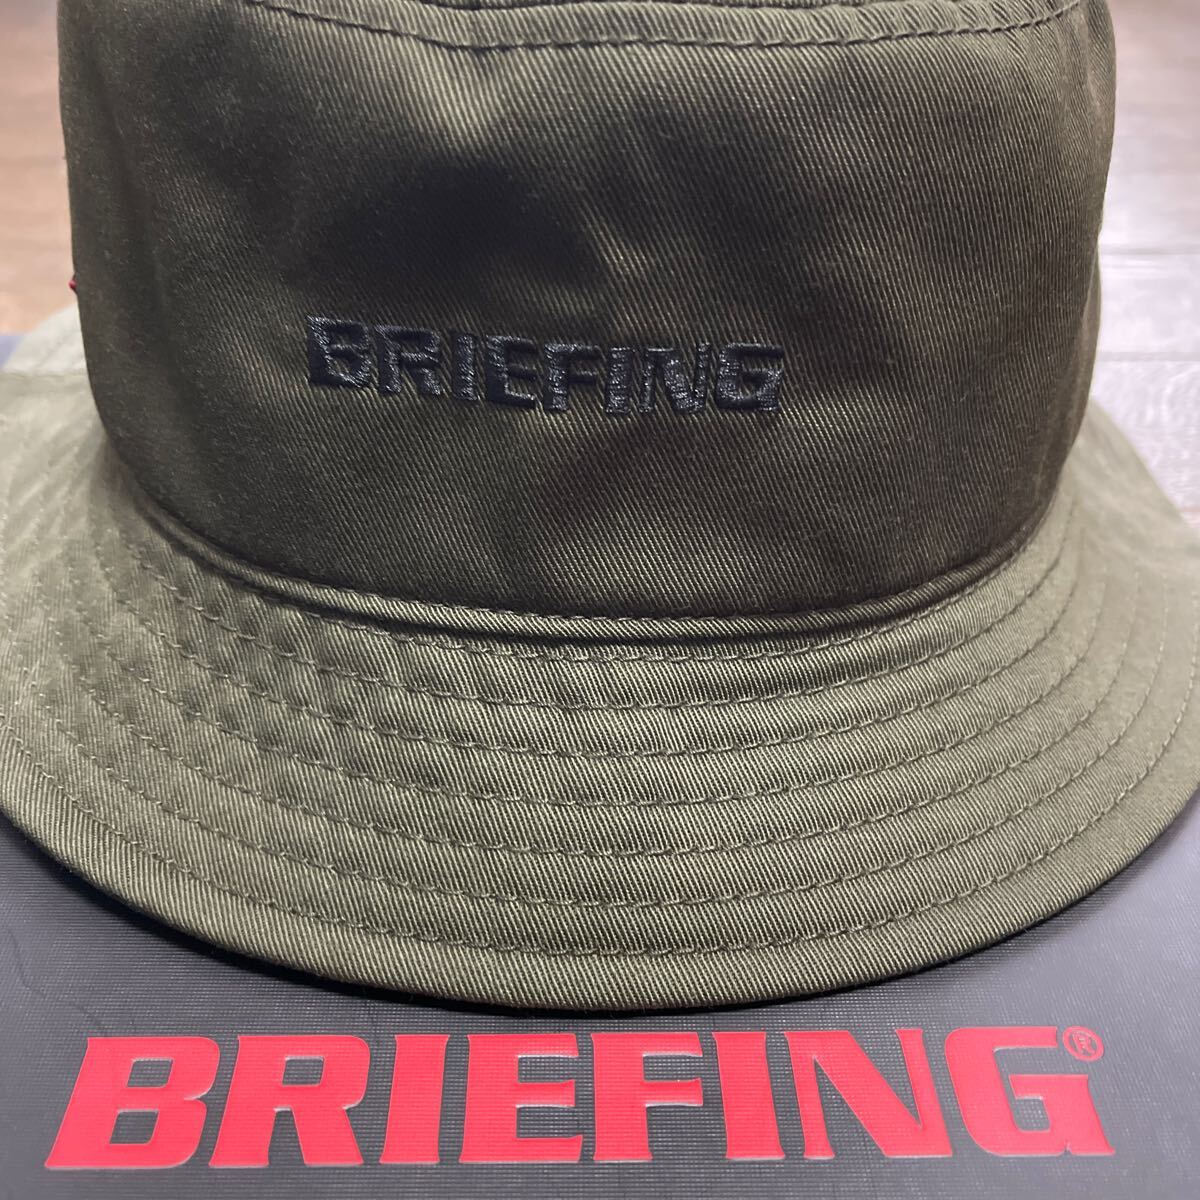  free shipping BRIEFING Briefing newest BASIC HAT bucket hat BRIEFING embroidery Logo tee..MESH liner .. reduction sweat cease flexible Olive( bargain L) new goods 